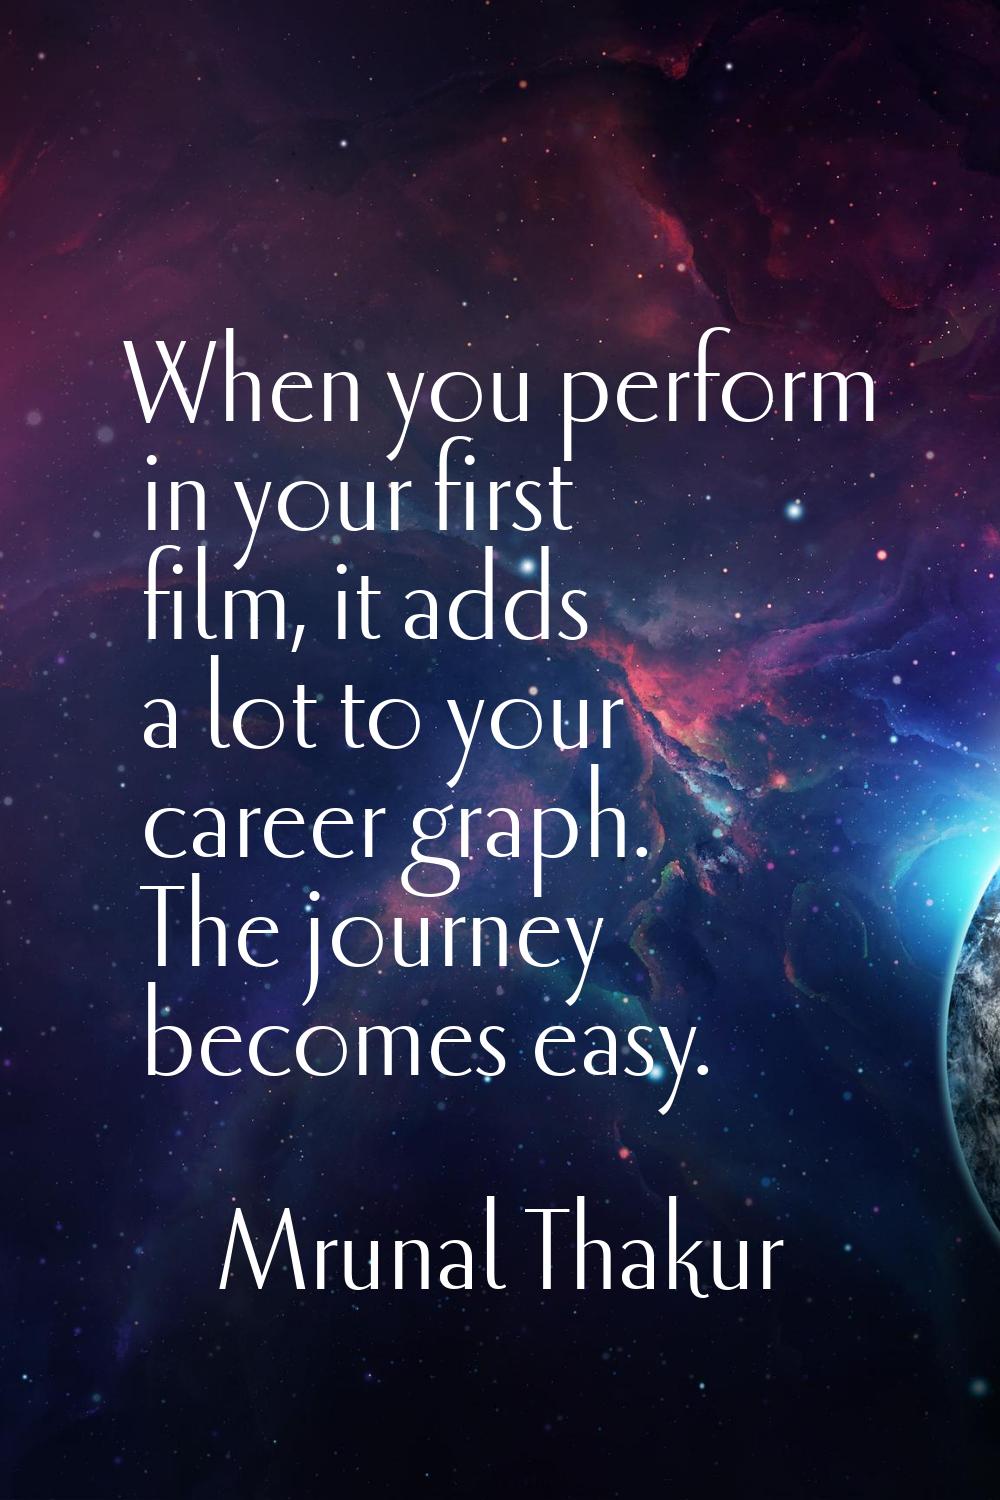 When you perform in your first film, it adds a lot to your career graph. The journey becomes easy.